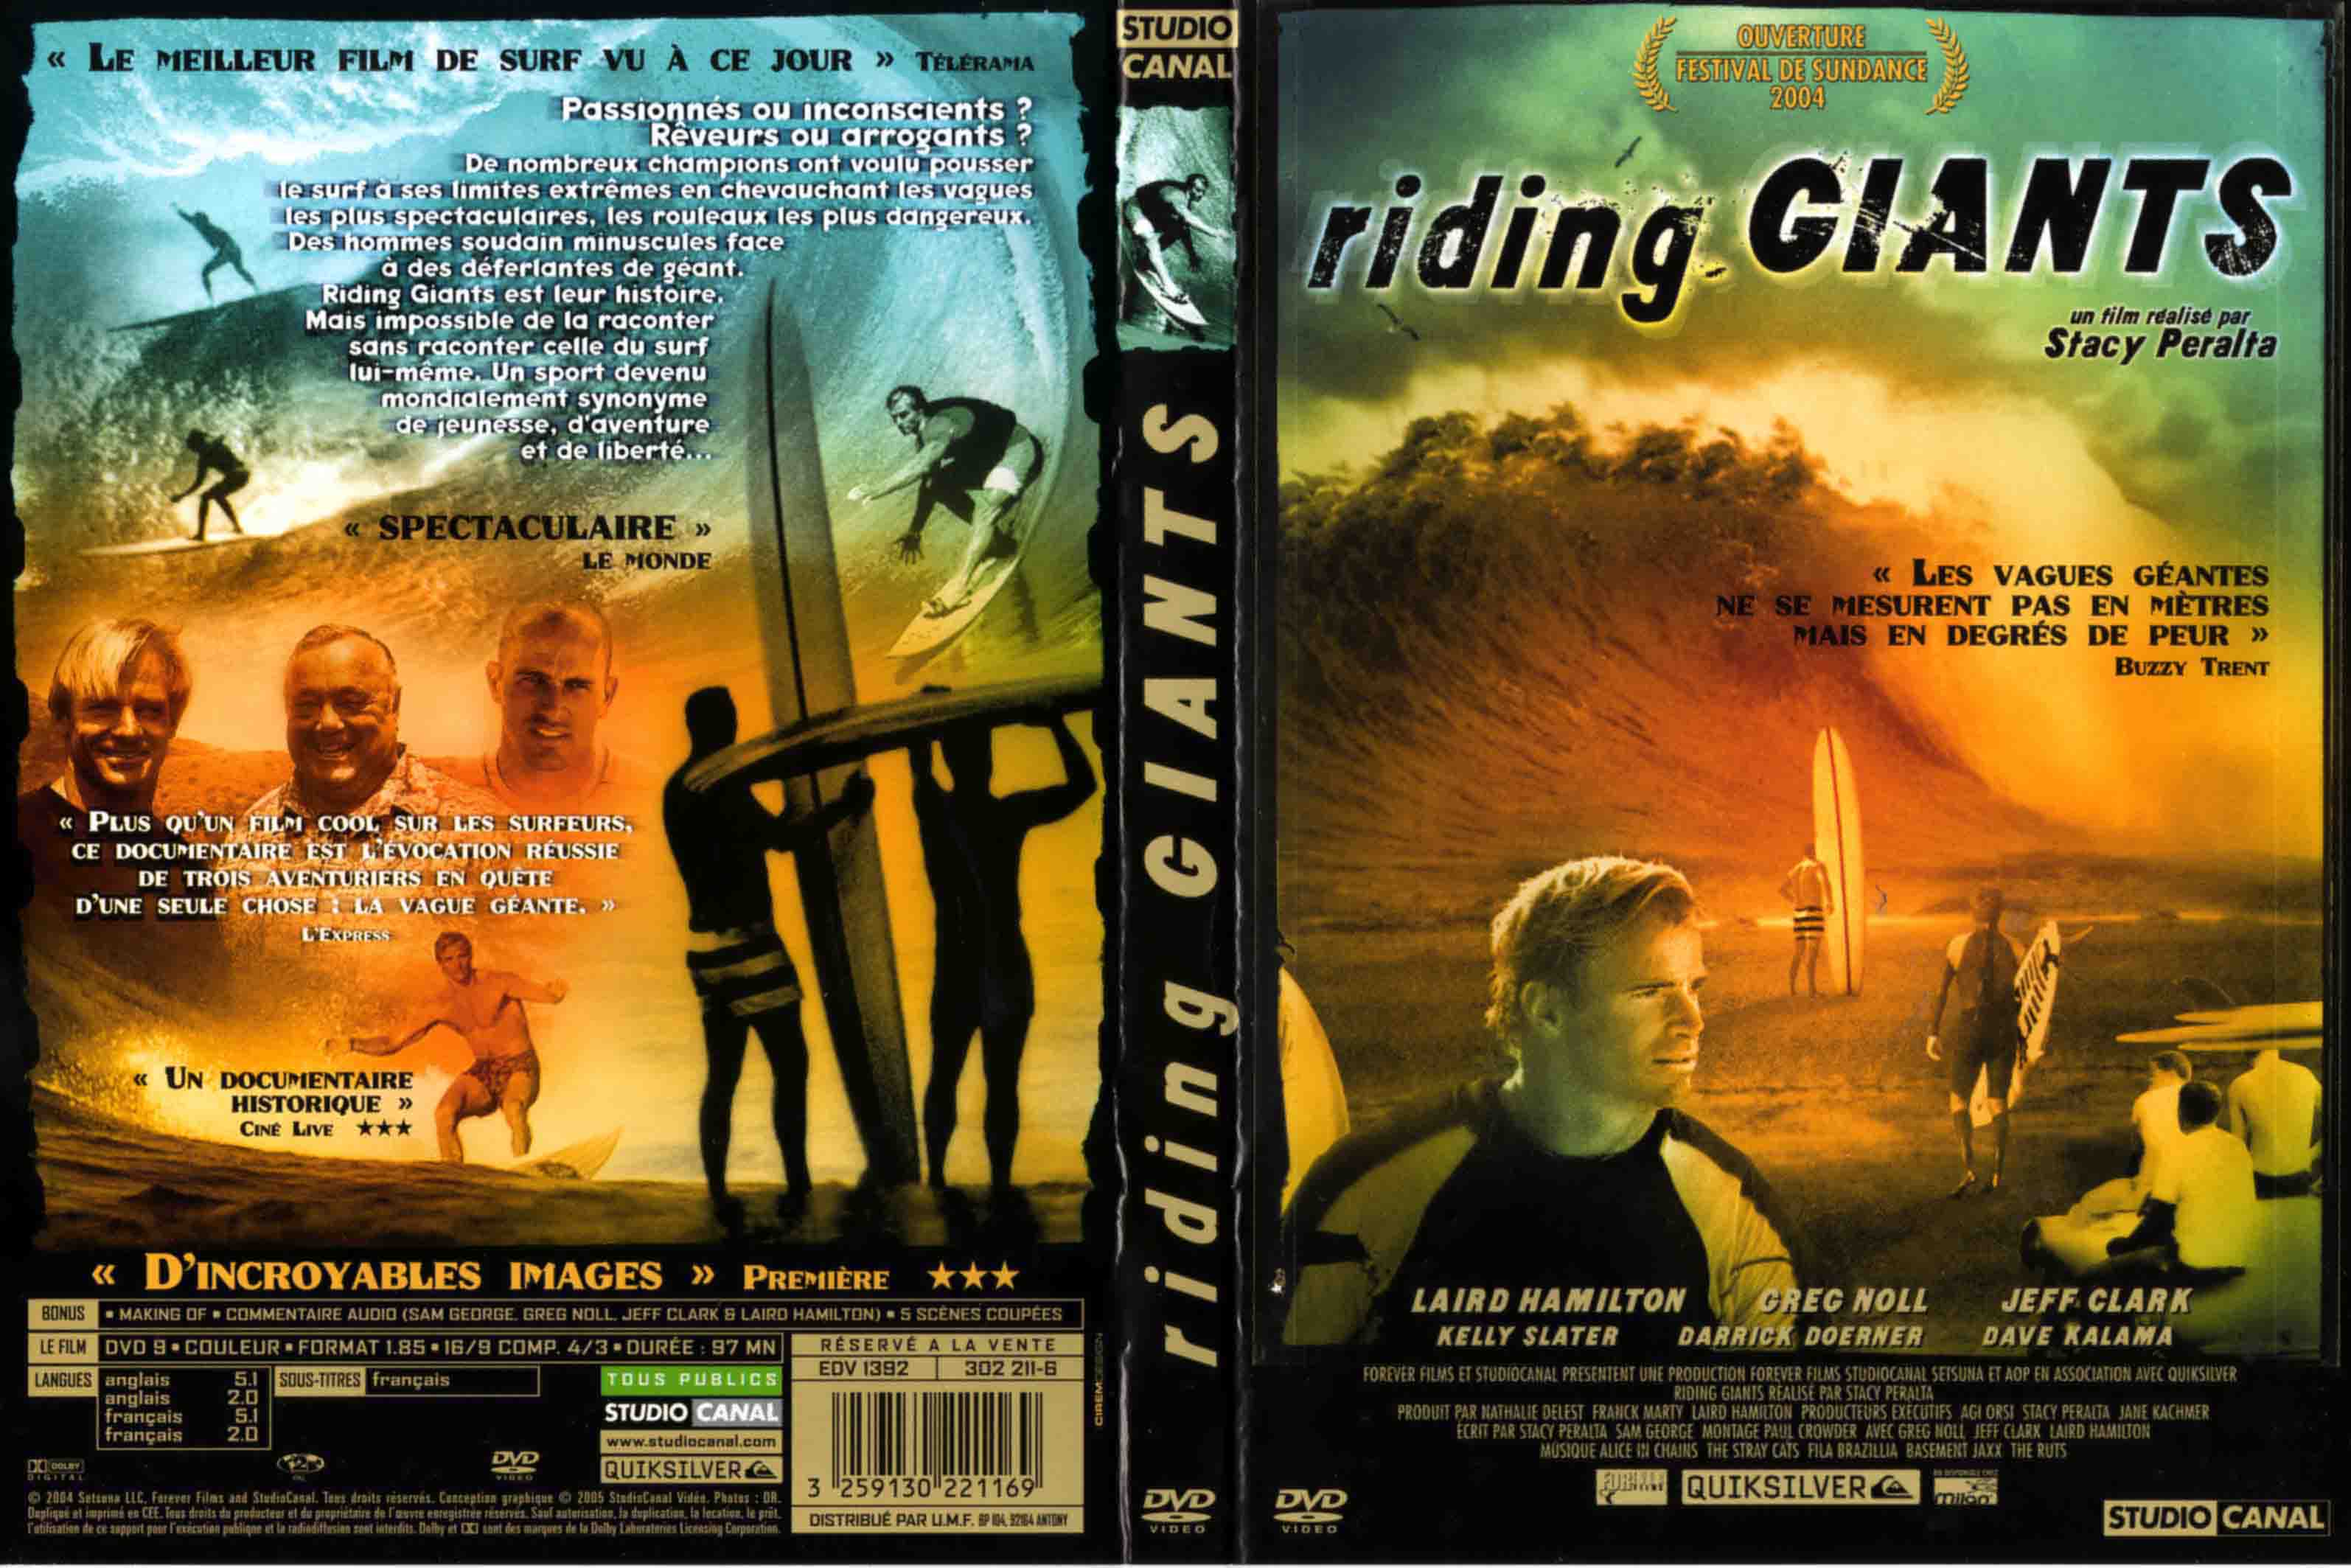 Jaquette DVD Riding giant